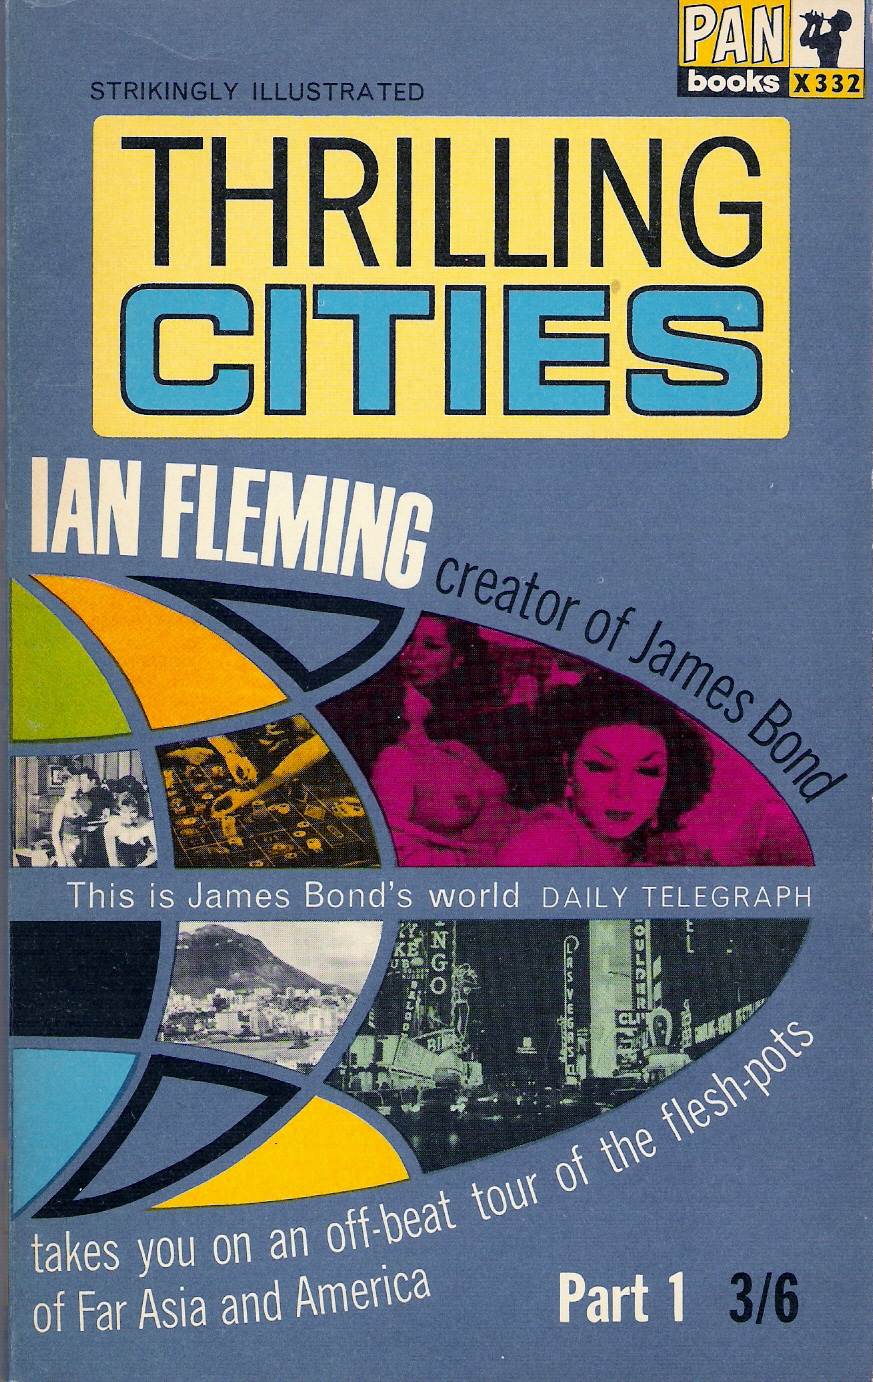 Thrilling Cities (part 1 of 2) Ian Fleming